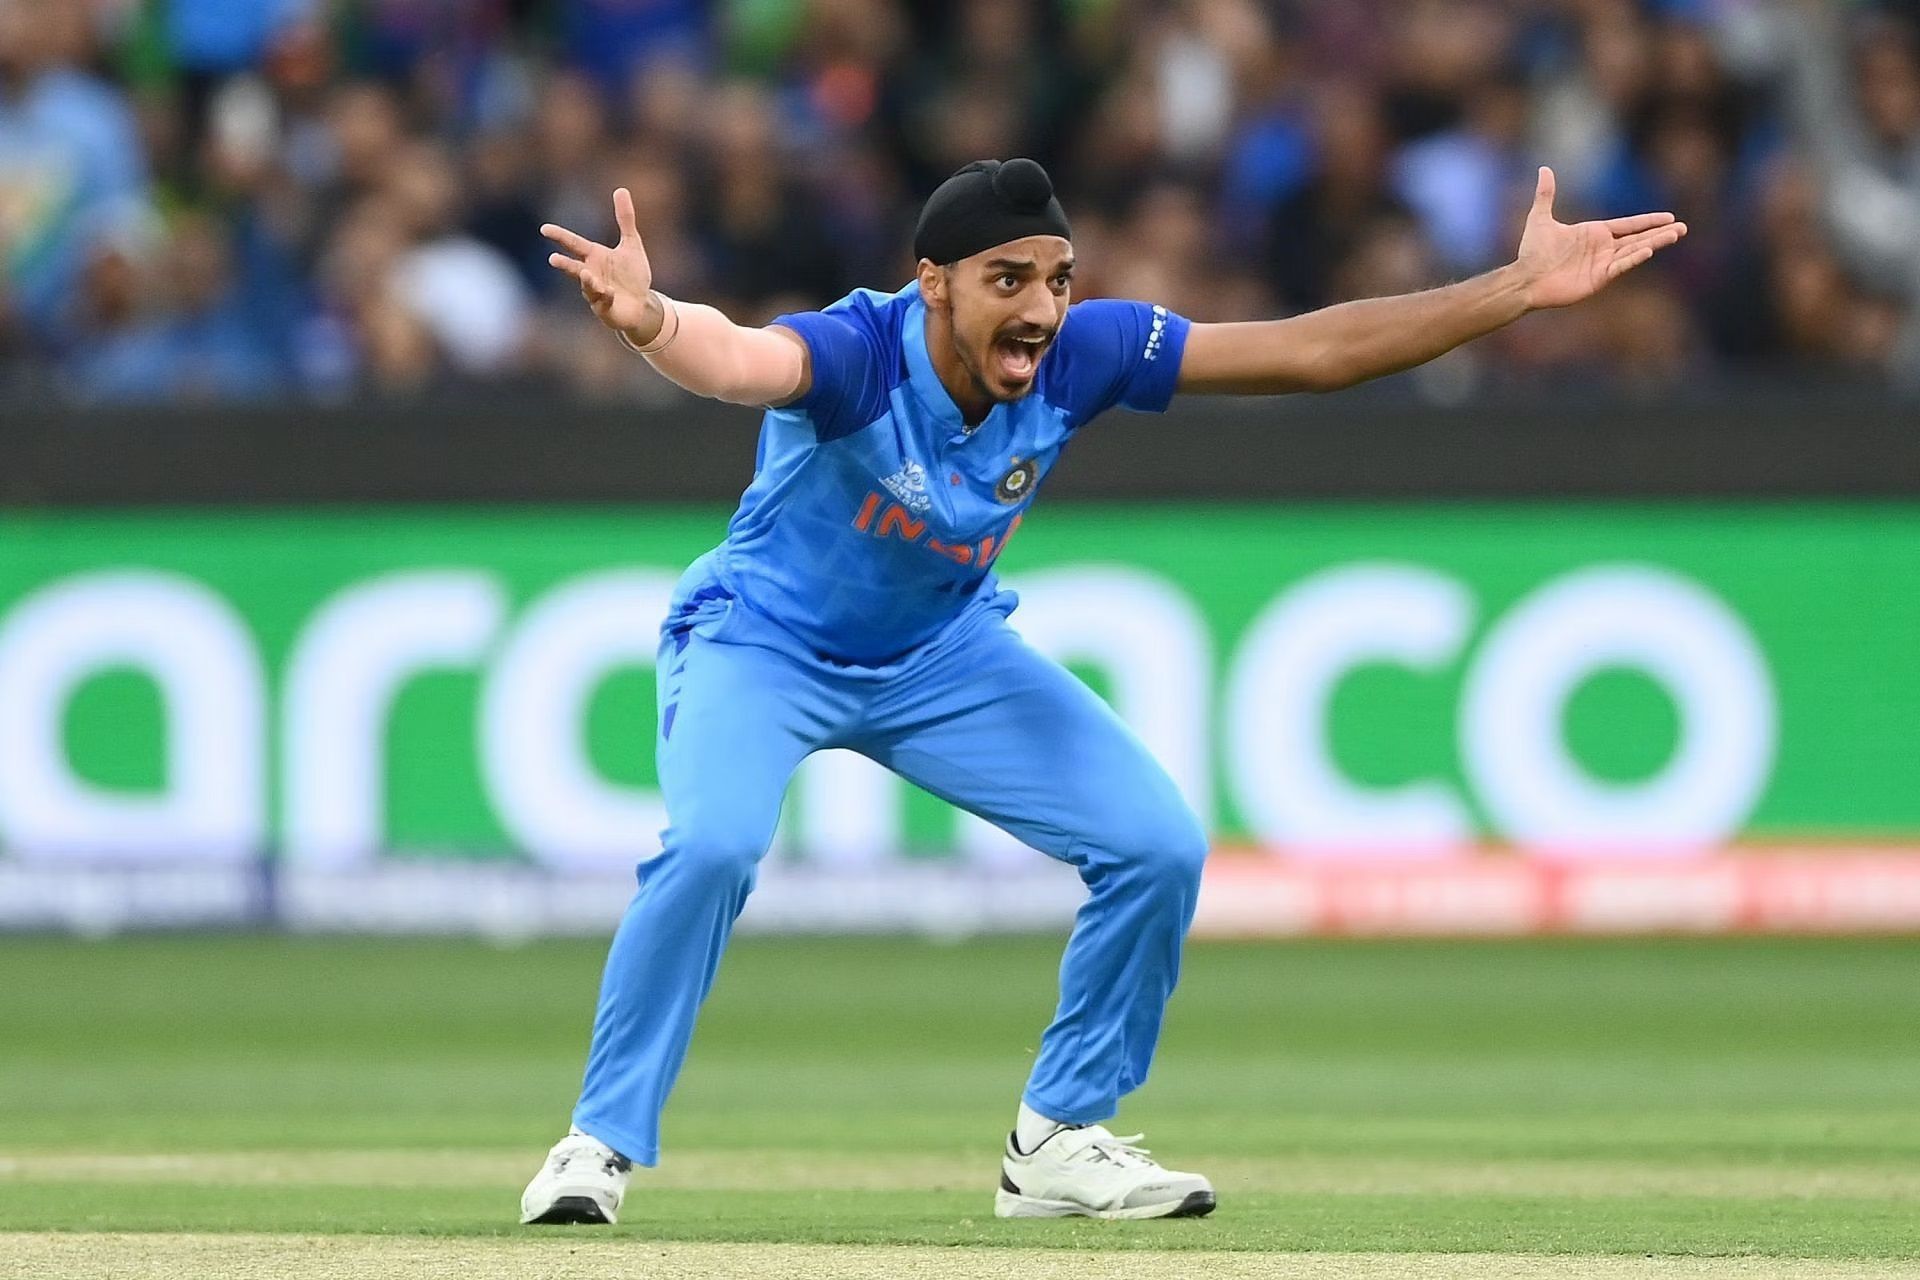 Arshdeep Singh conceded 34 runs in his last two overs. [P/C: Getty]